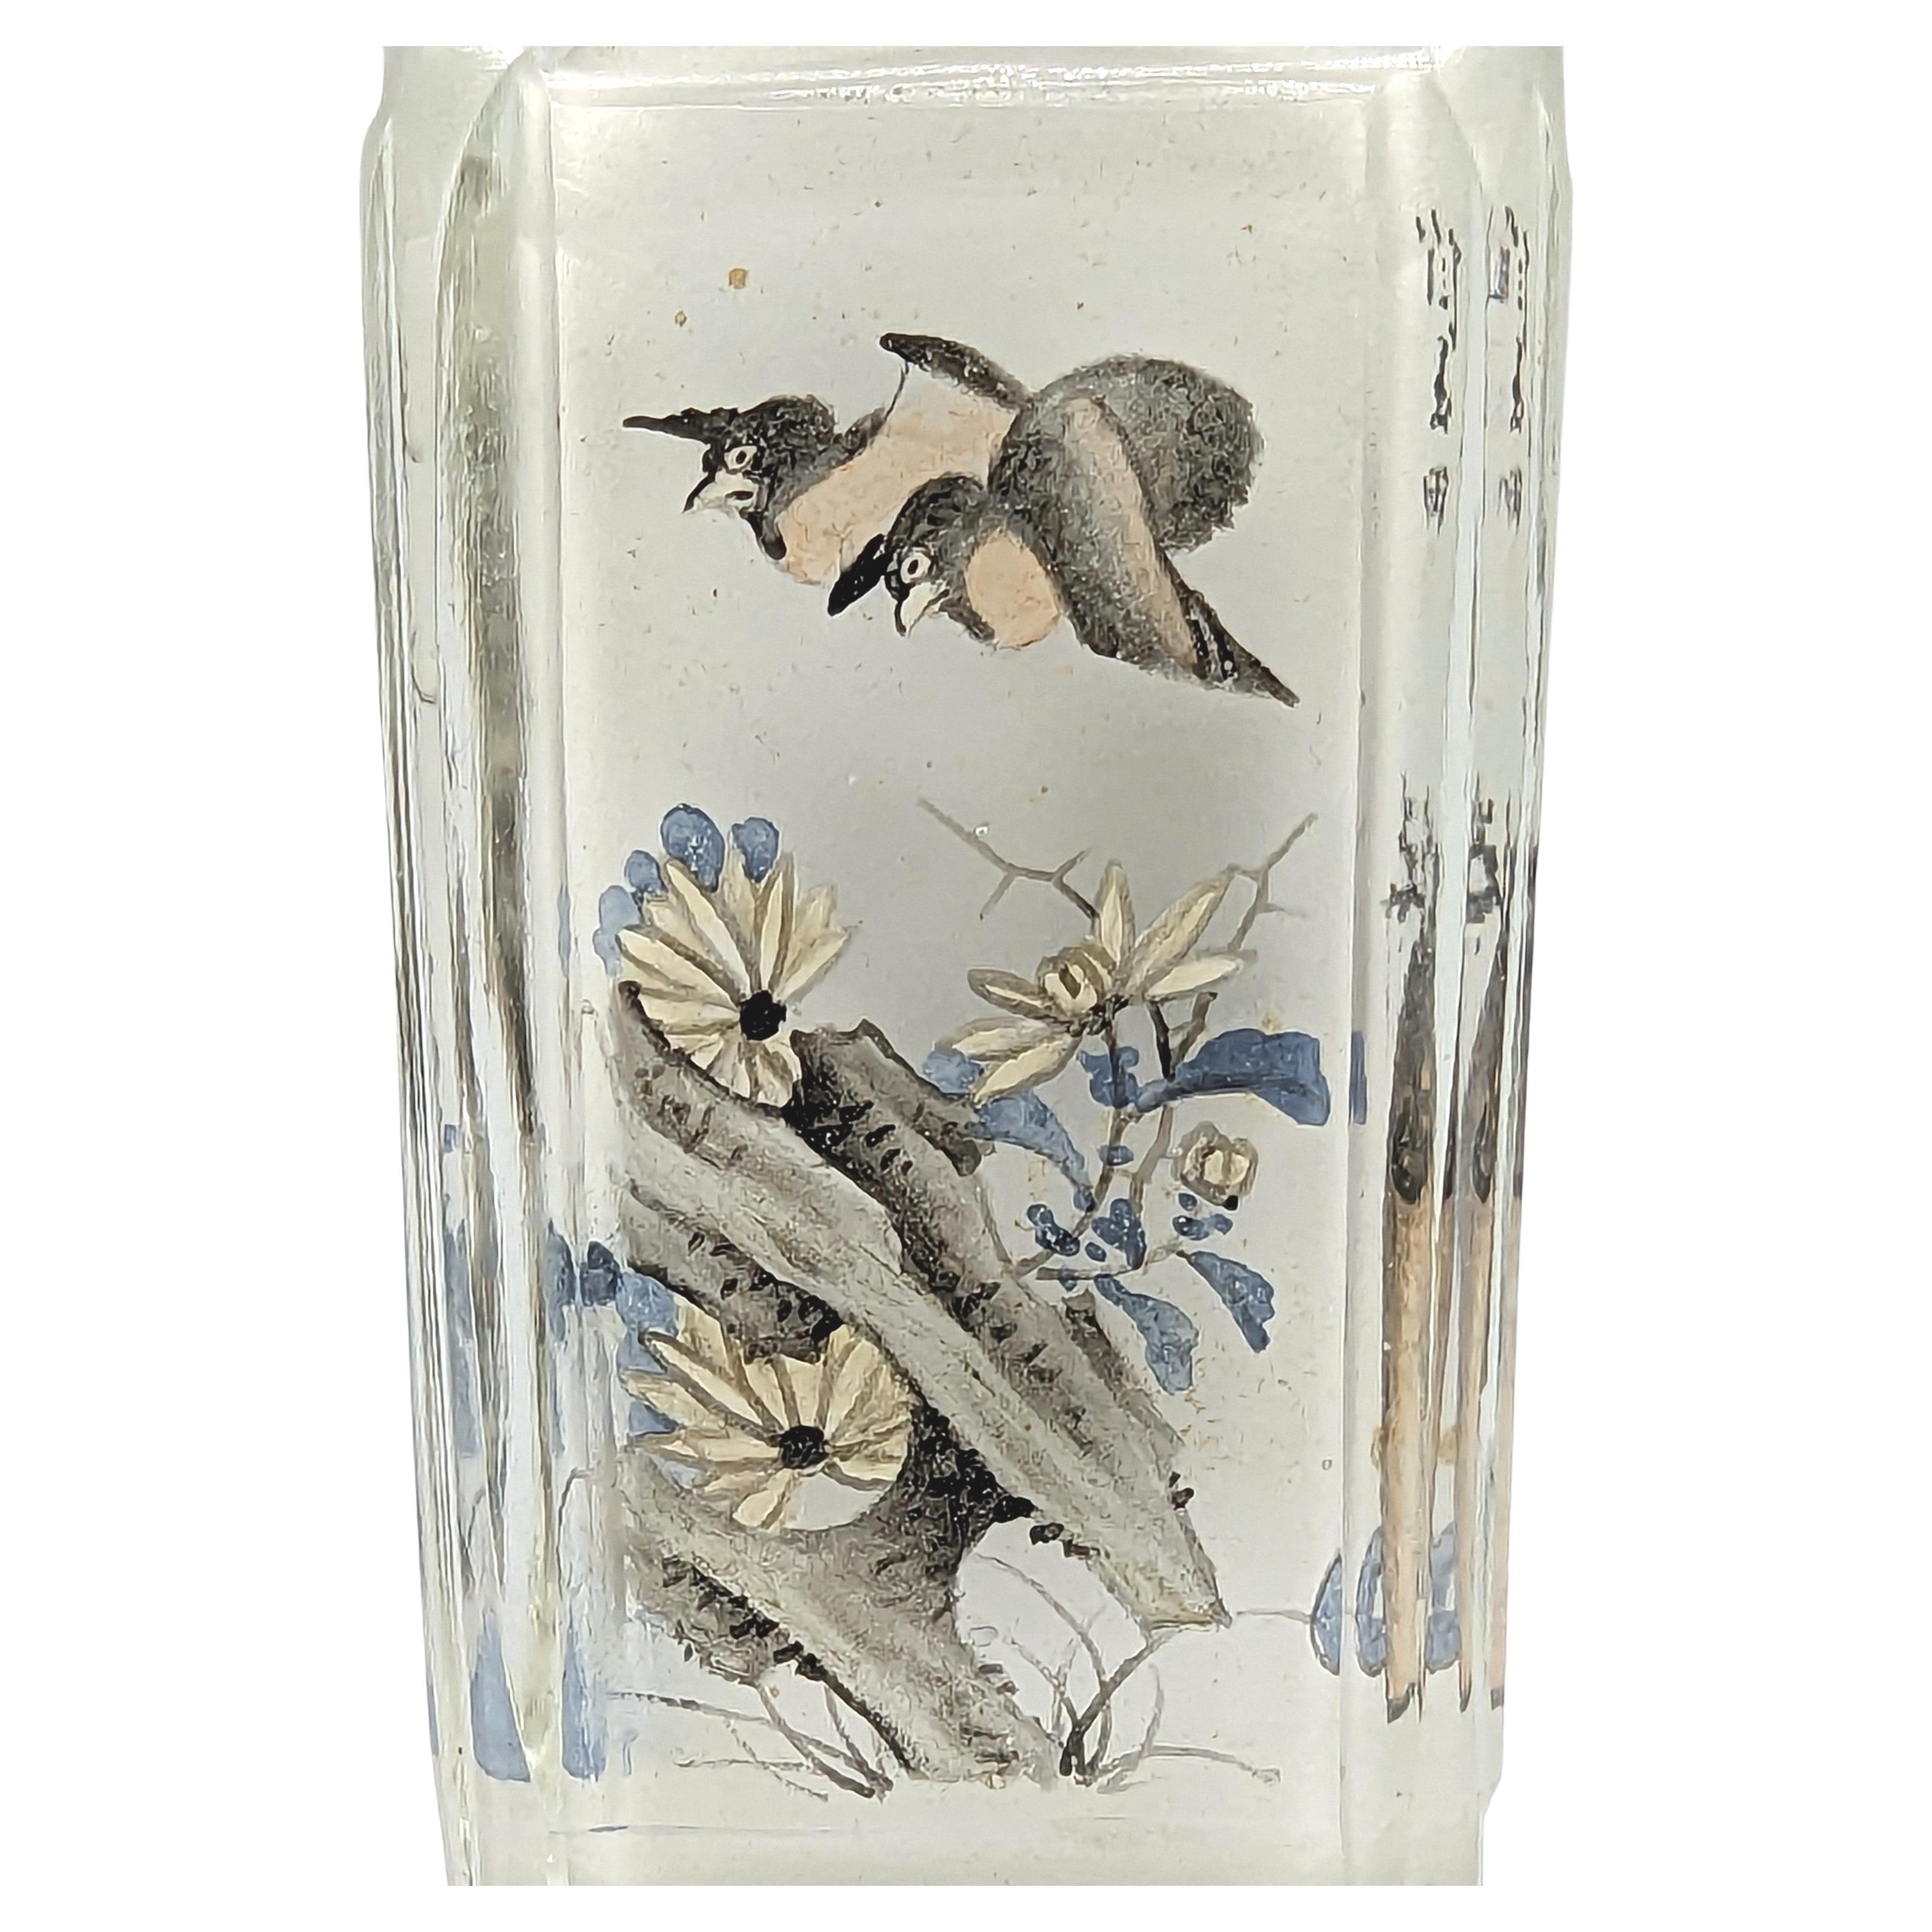 An antique Chinese inside painted glass snuff bottle, finely painted on four  faceted panels with two people in a mountainous landscape scene, two birds in a rocky garden scene, two insects in a turnip and flowers scene, and two plants in pottery